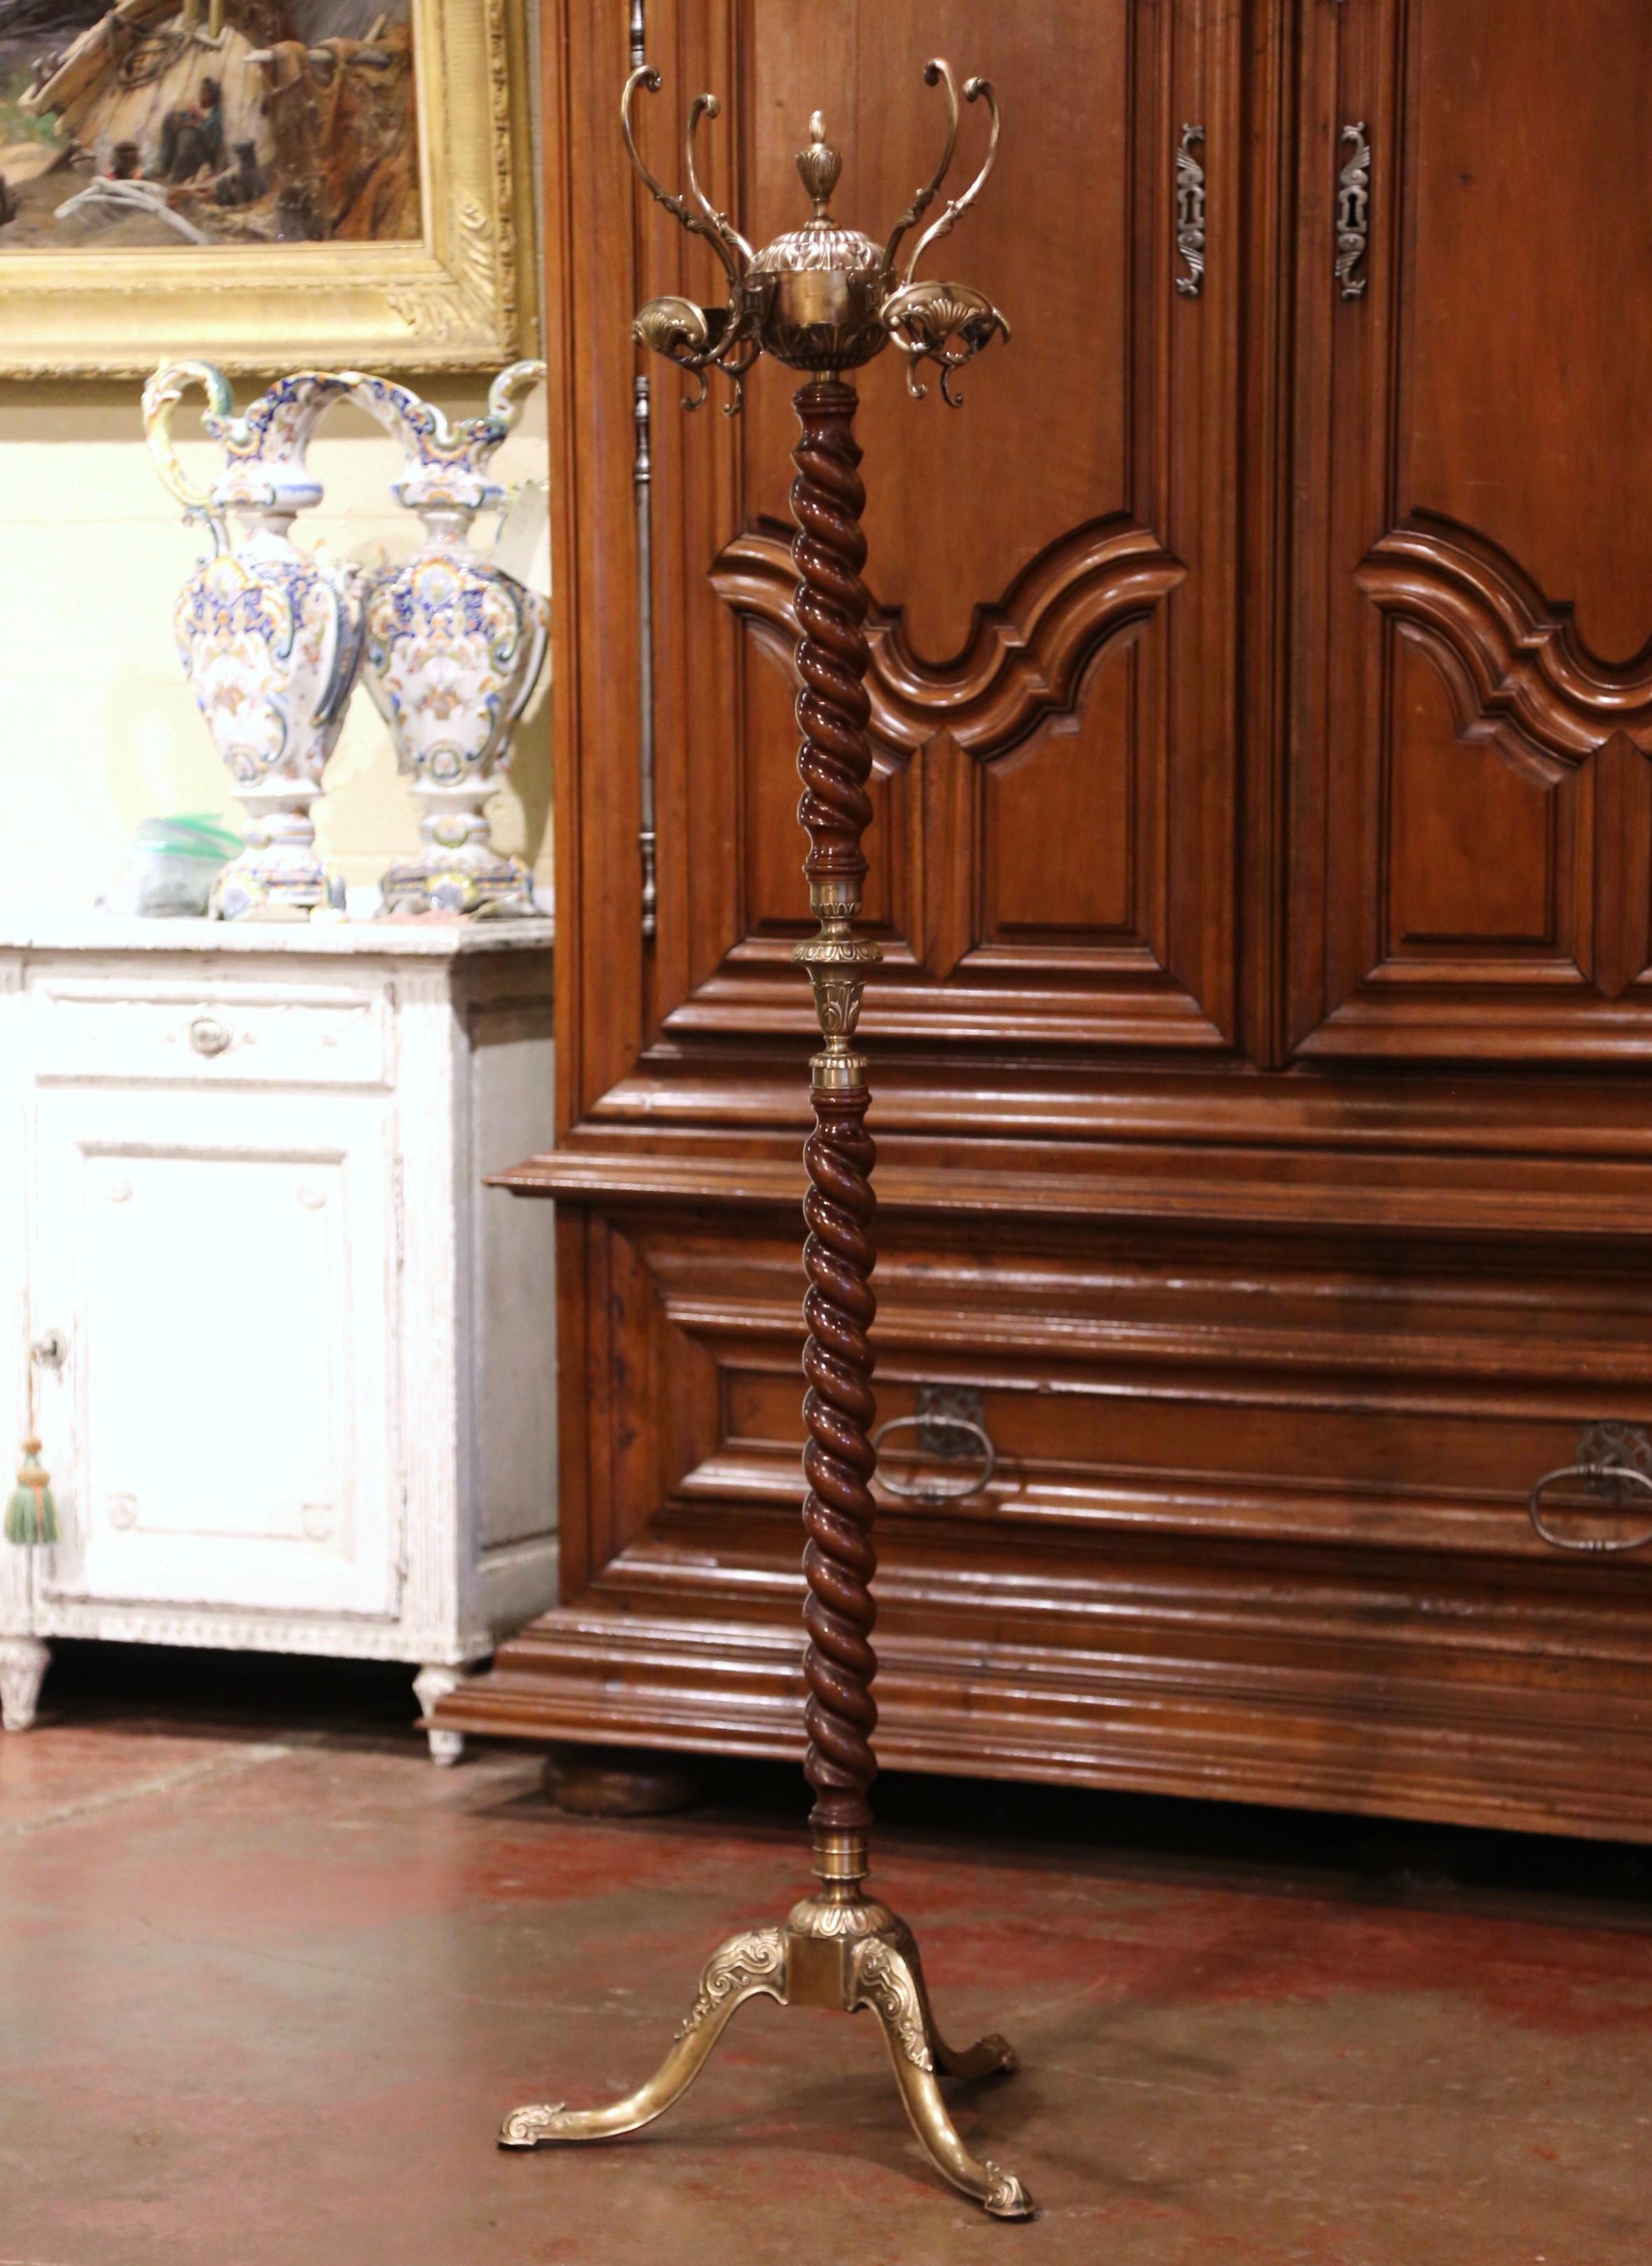 This antique carved fruit wood and brass hall tree was crafted in France, circa 1920. Standing on a wide tripod three curved legs ending with scrolled acanthus leaf motifs feet, the tall rack features a barley twist spiral central stem decorated